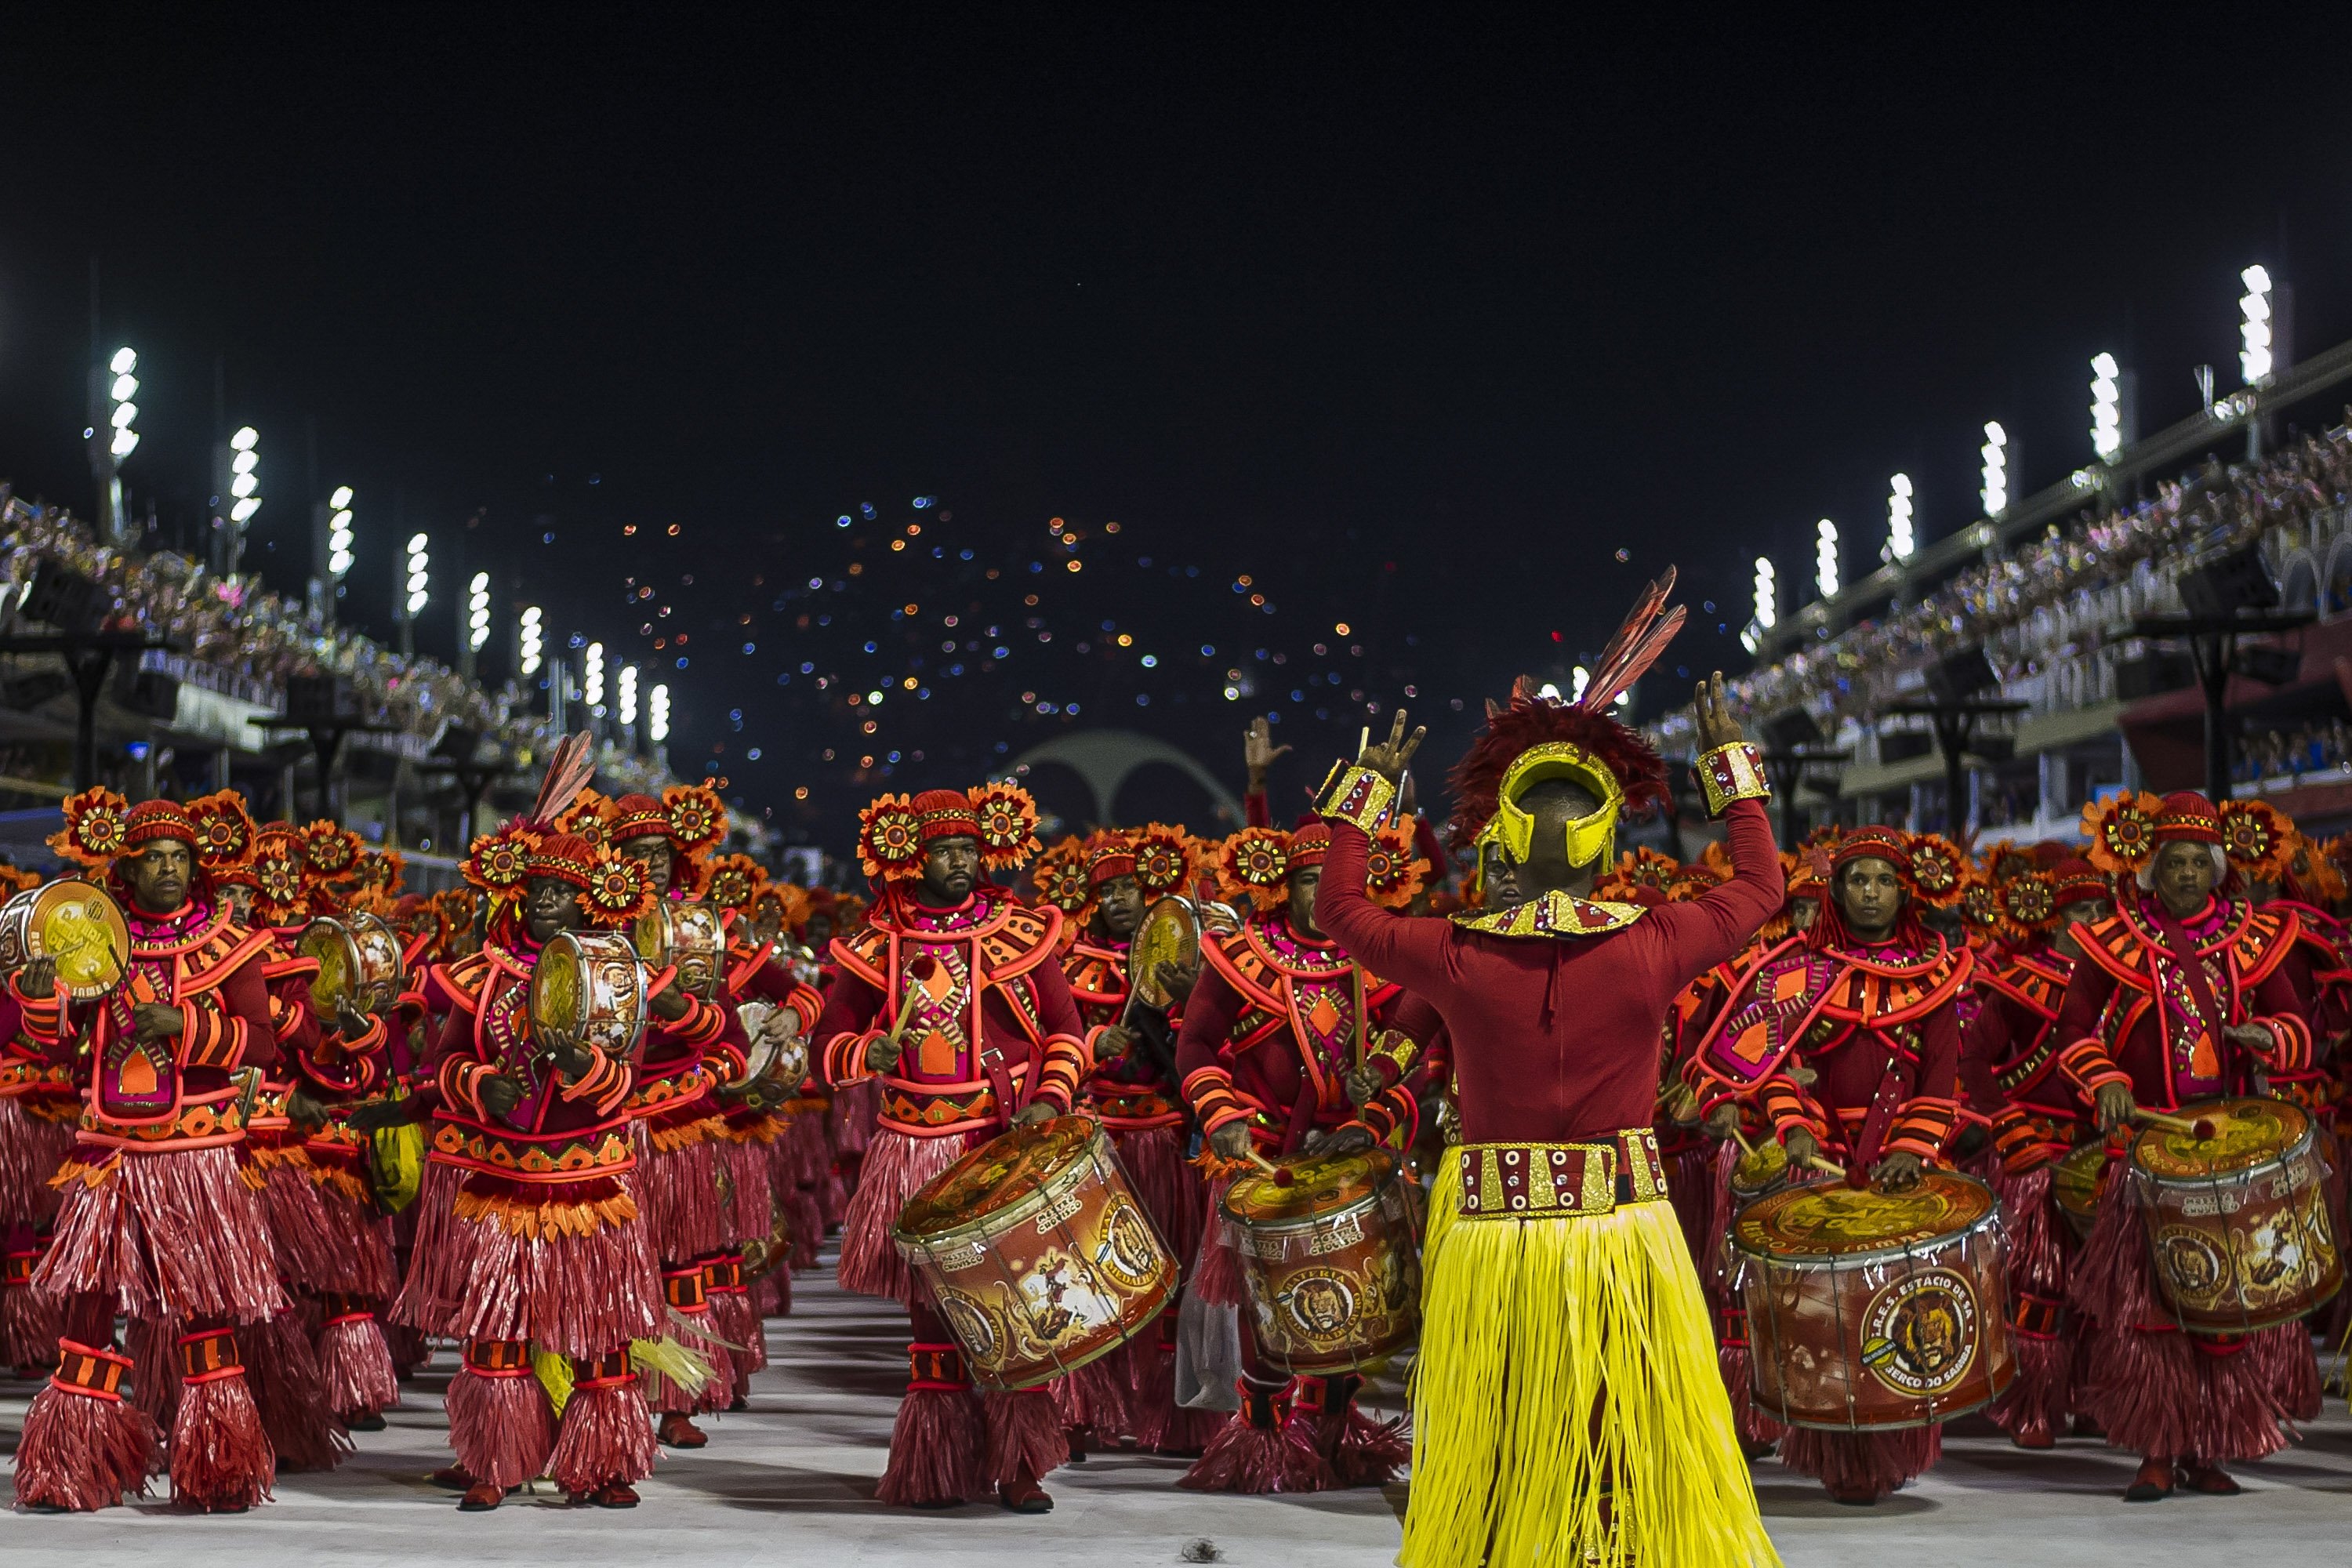 Floats, drummers and dance: Brazil's Carnival returns after pandemic hiatus